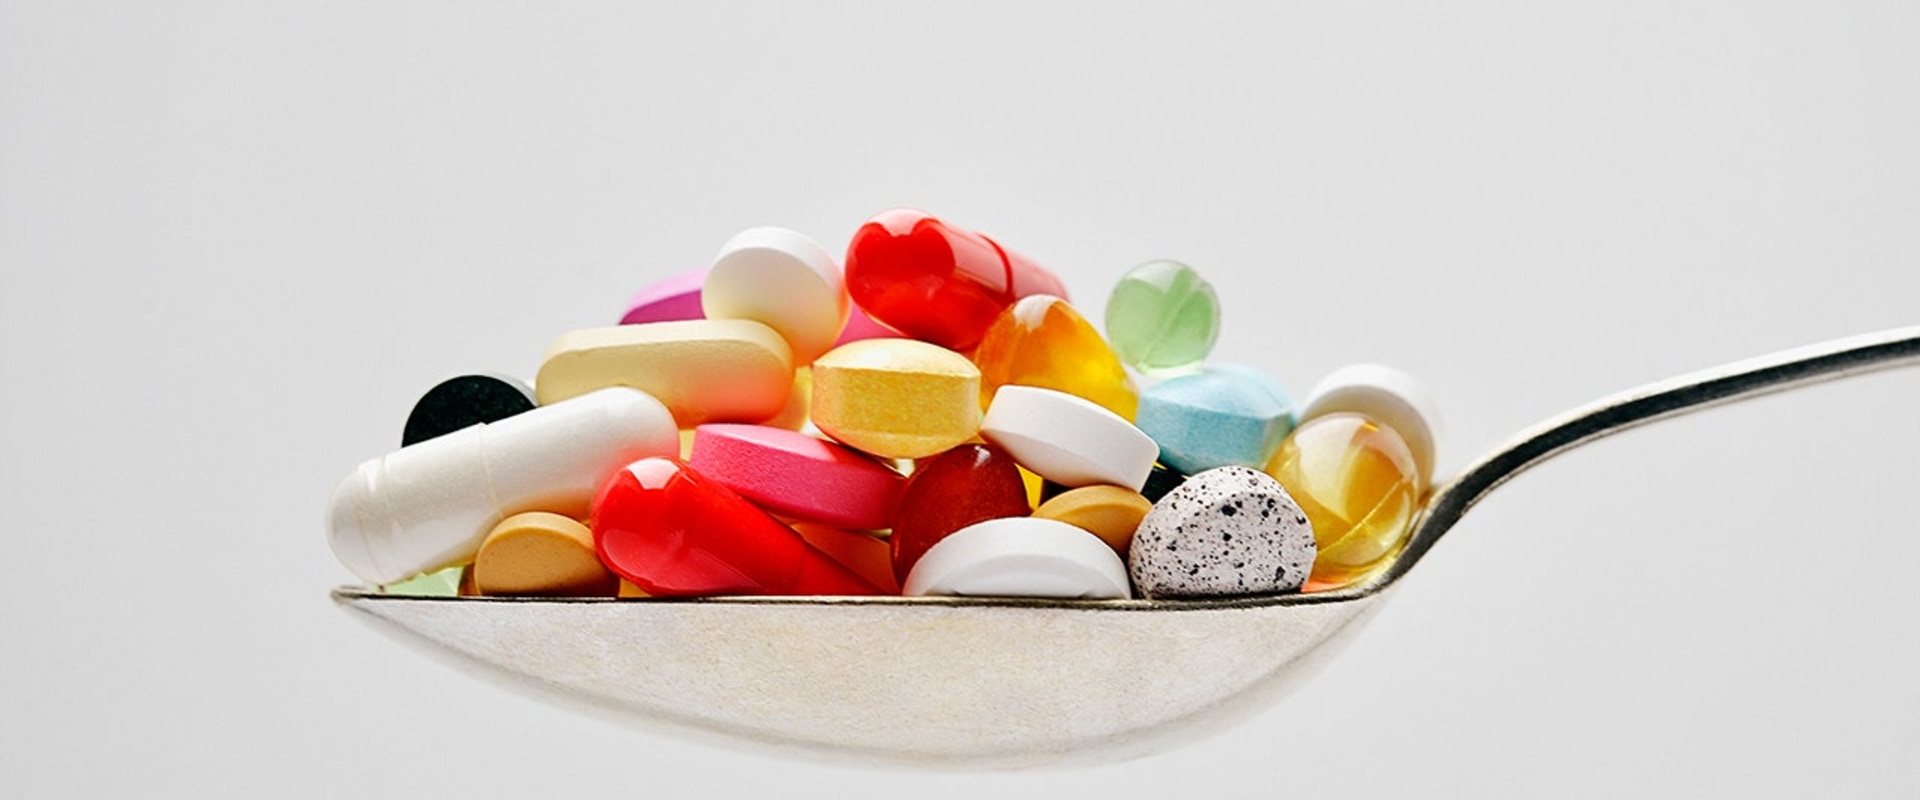 Are supplements a waste of time and money?